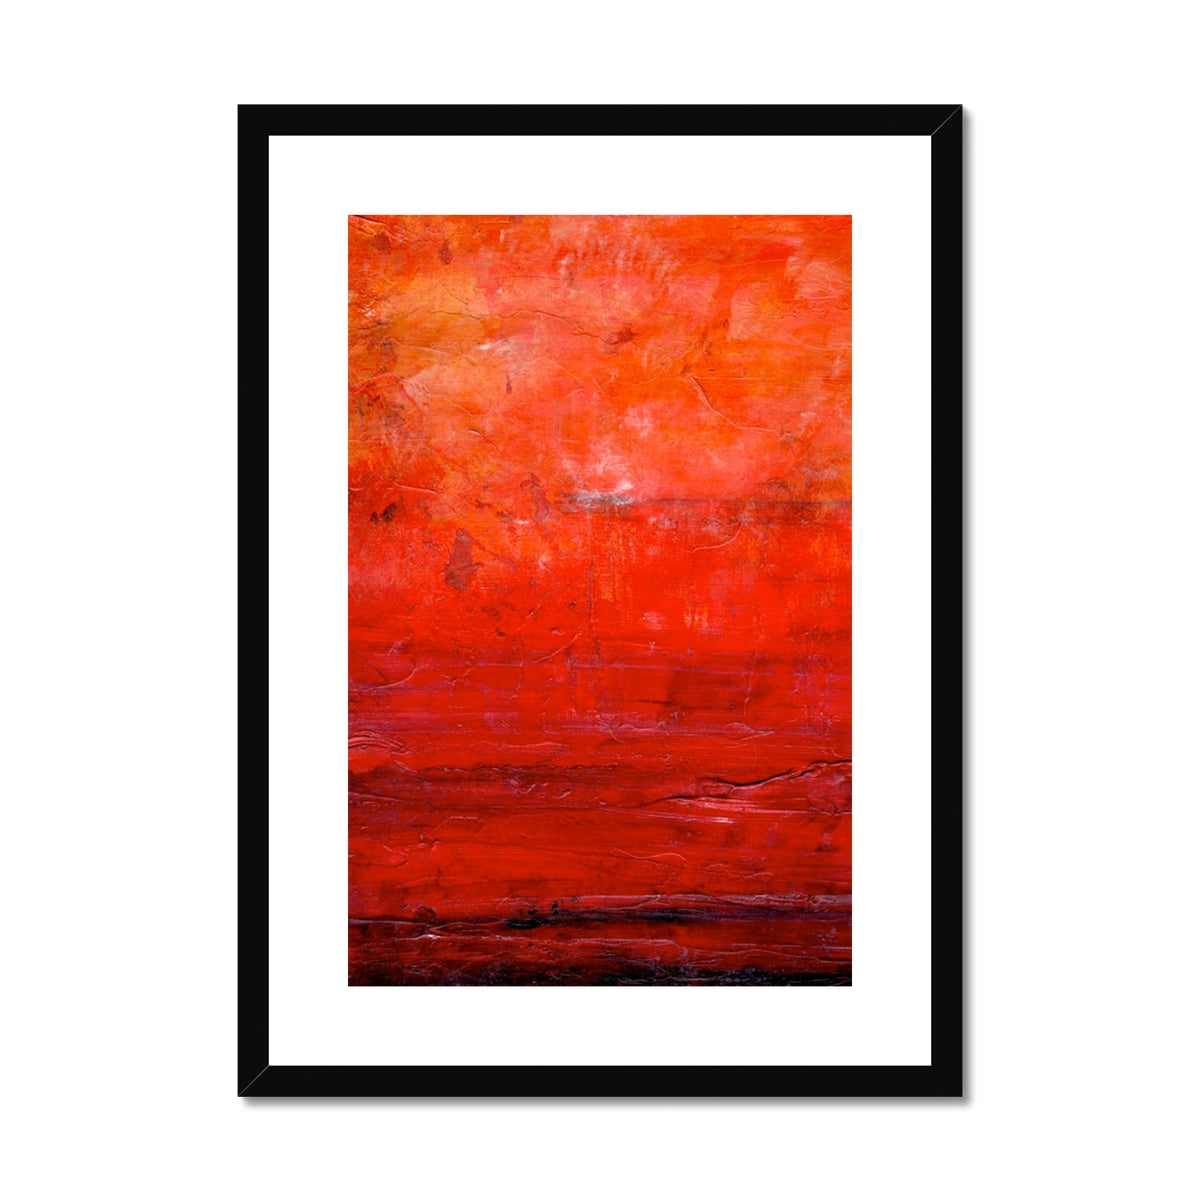 Abstract Summer Painting | Framed & Mounted Prints From Scotland-Framed & Mounted Prints-Abstract & Impressionistic Art Gallery-A2 Portrait-Black Frame-Paintings, Prints, Homeware, Art Gifts From Scotland By Scottish Artist Kevin Hunter